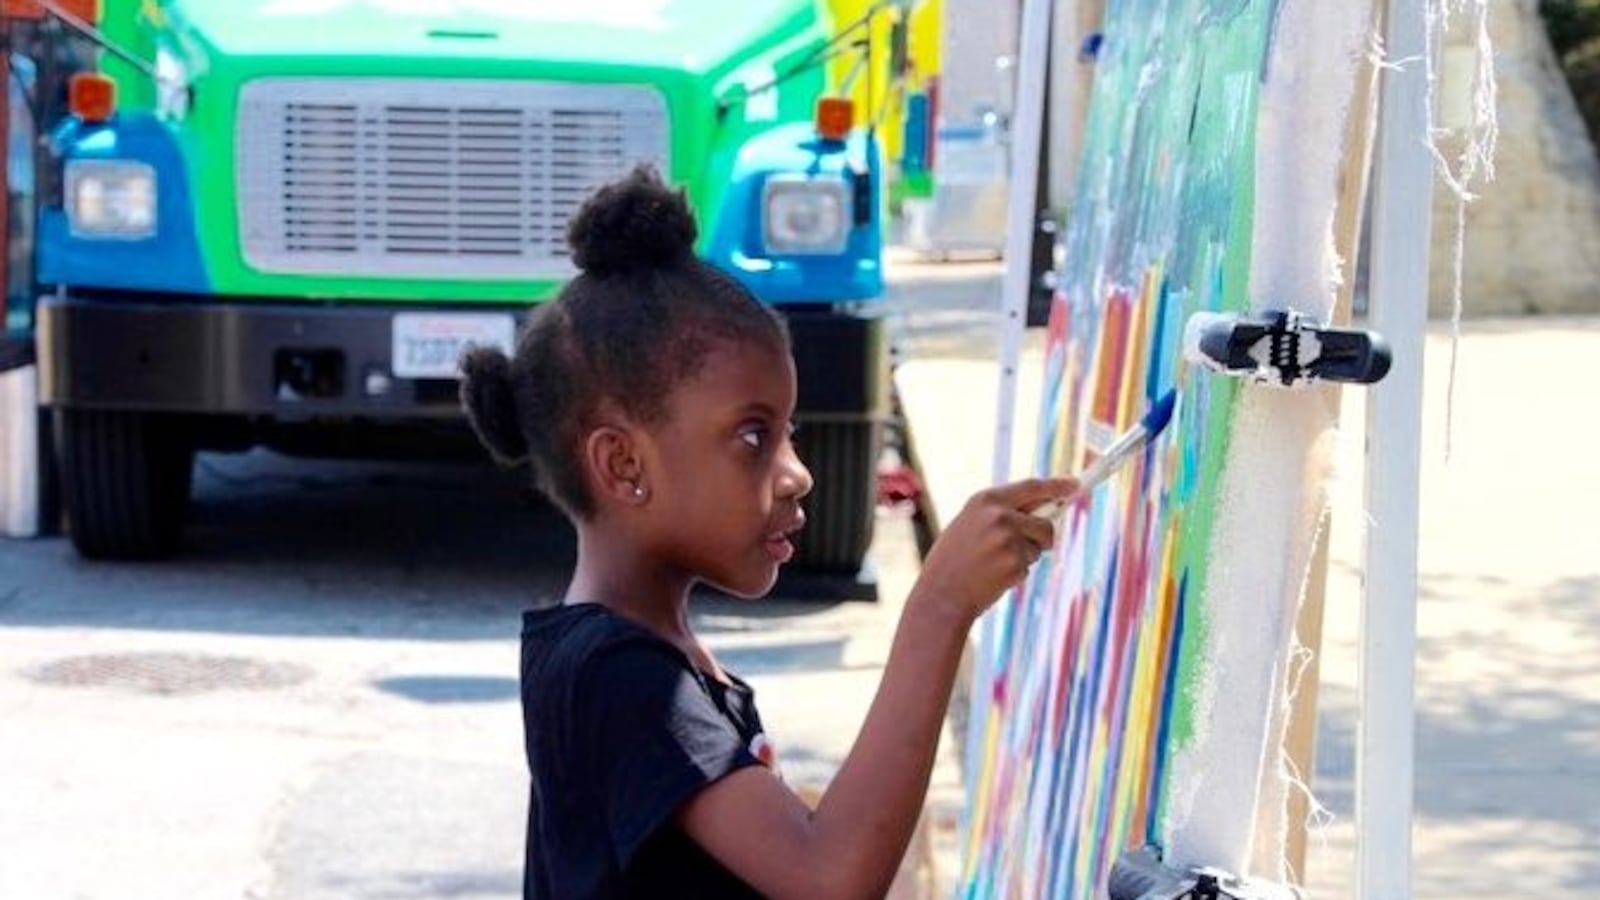 Gabrielle Colburn, 7, adds her artistic flair to a mural in downtown Memphis in conjunction with the XQ Super Schools bus tour in June. (Caroline Bauman)